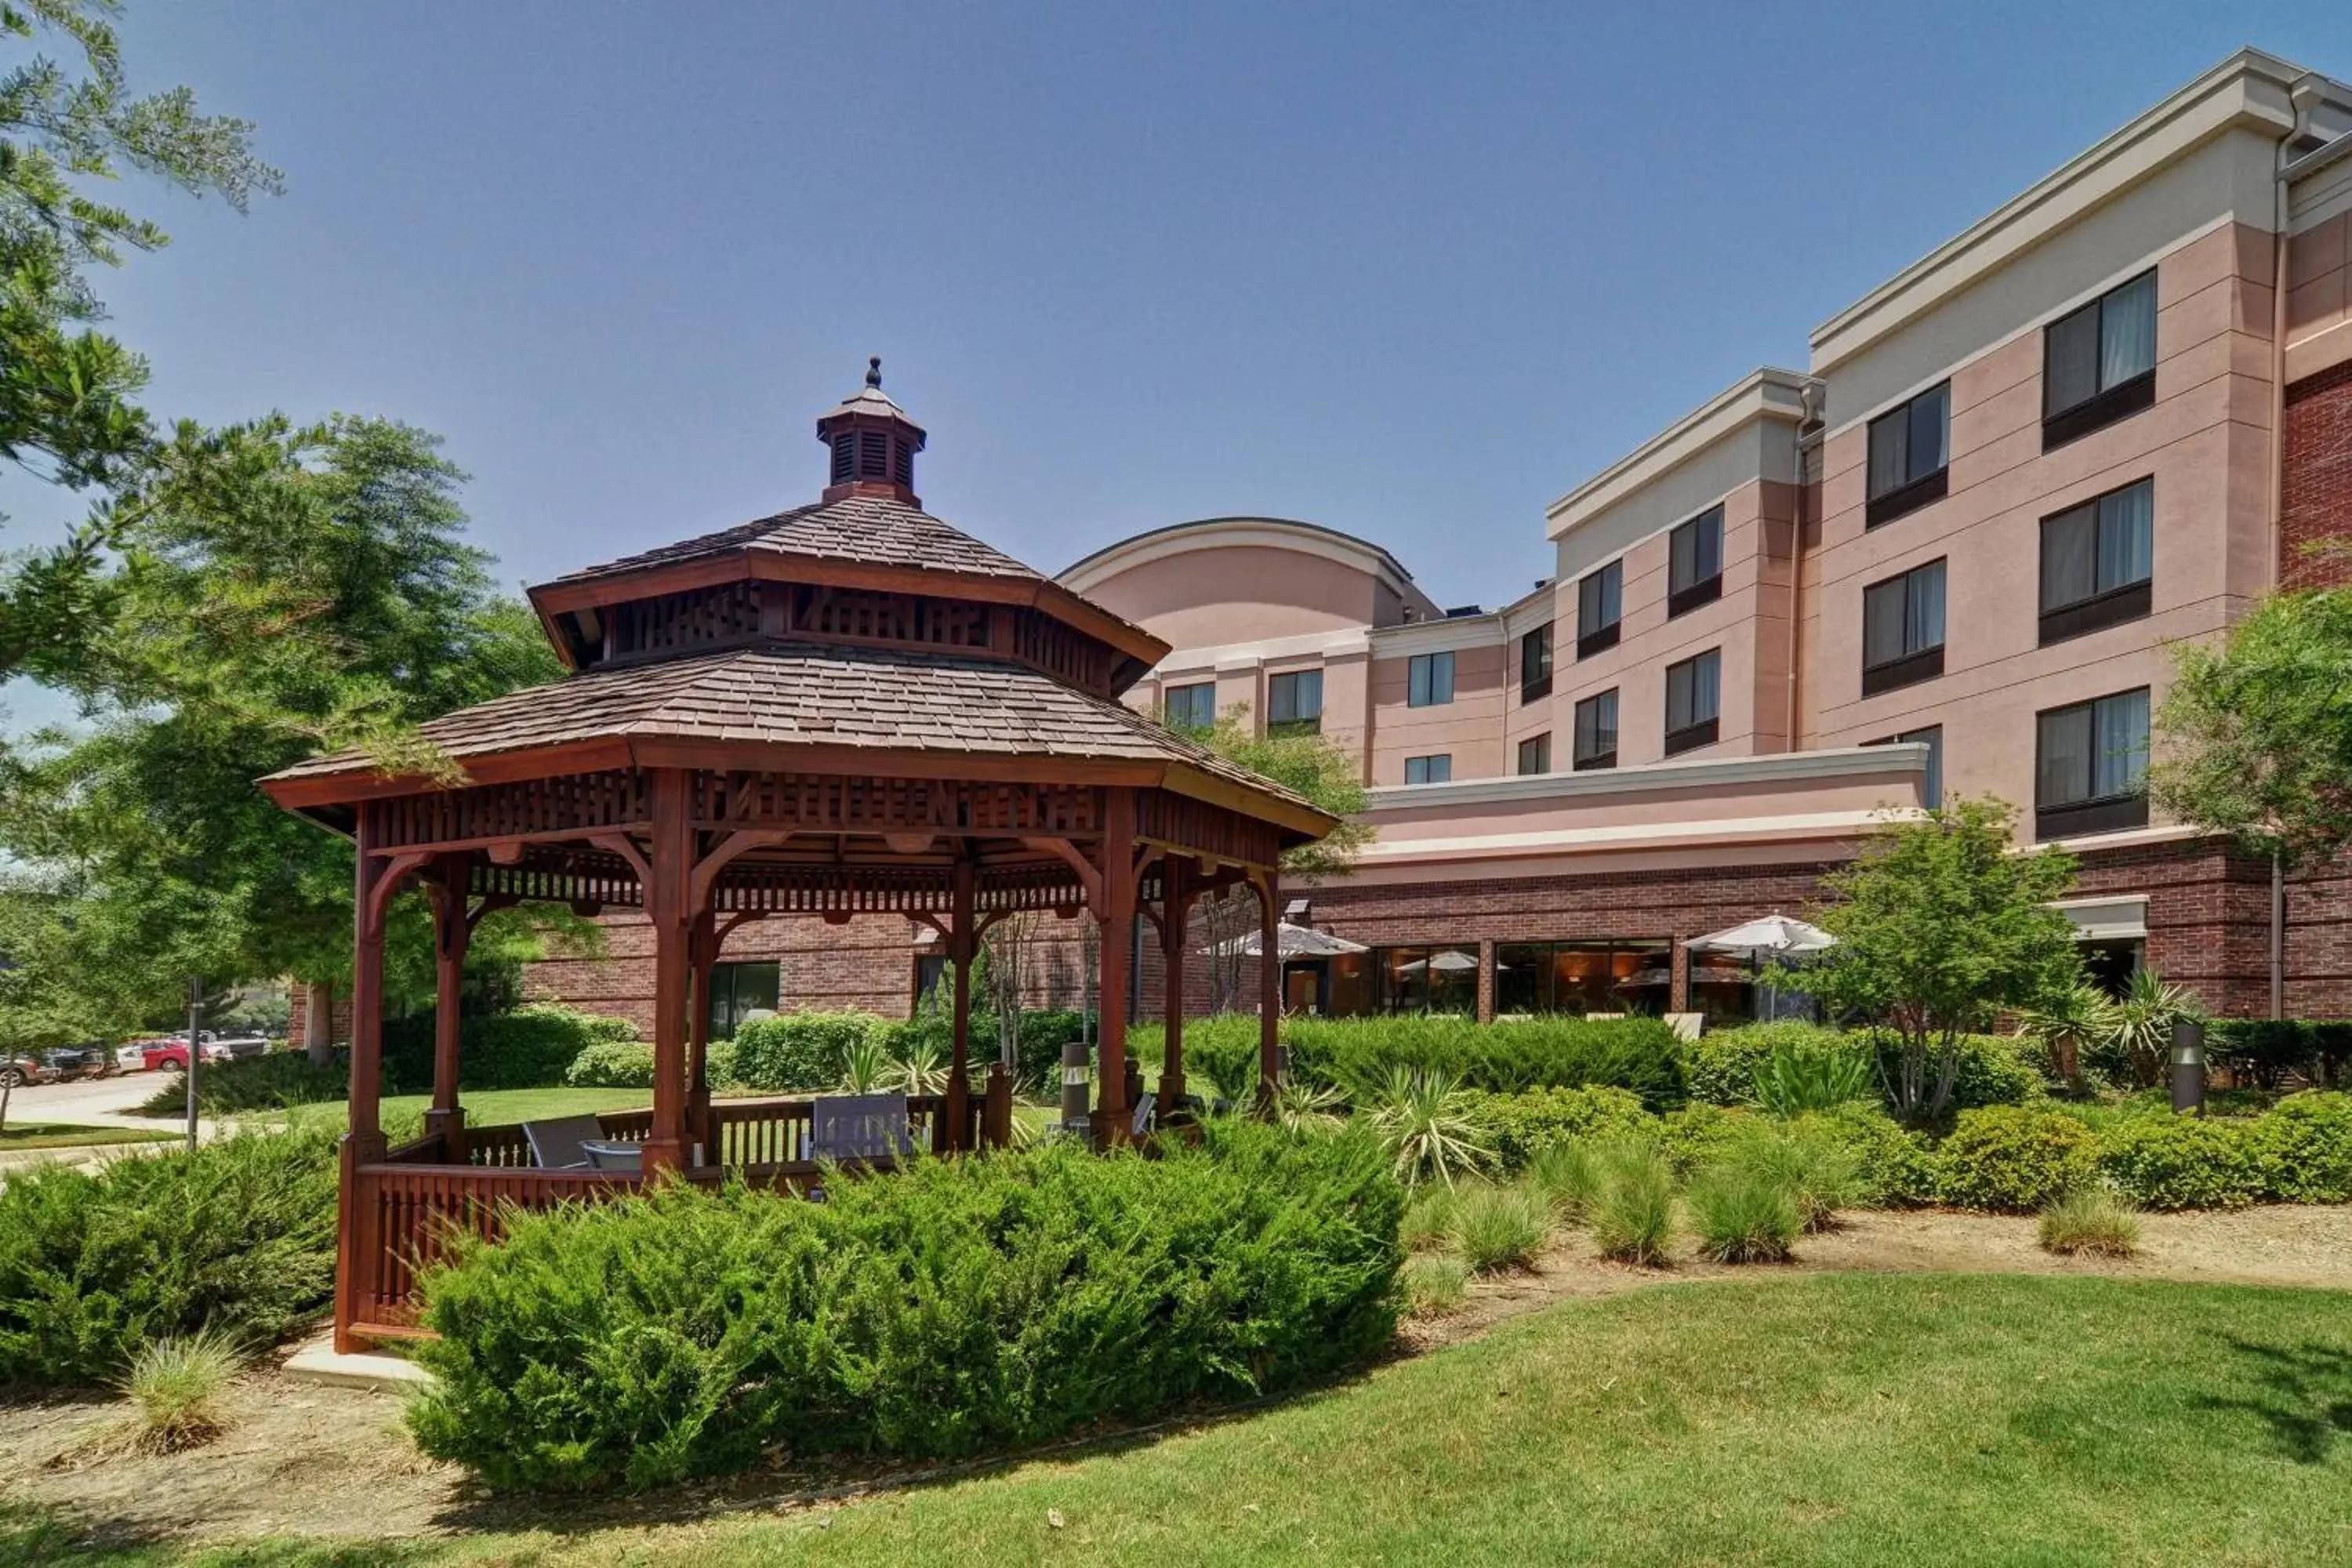 Property Building in SpringHill Suites by Marriott Dallas DFW Airport East Las Colinas Irving